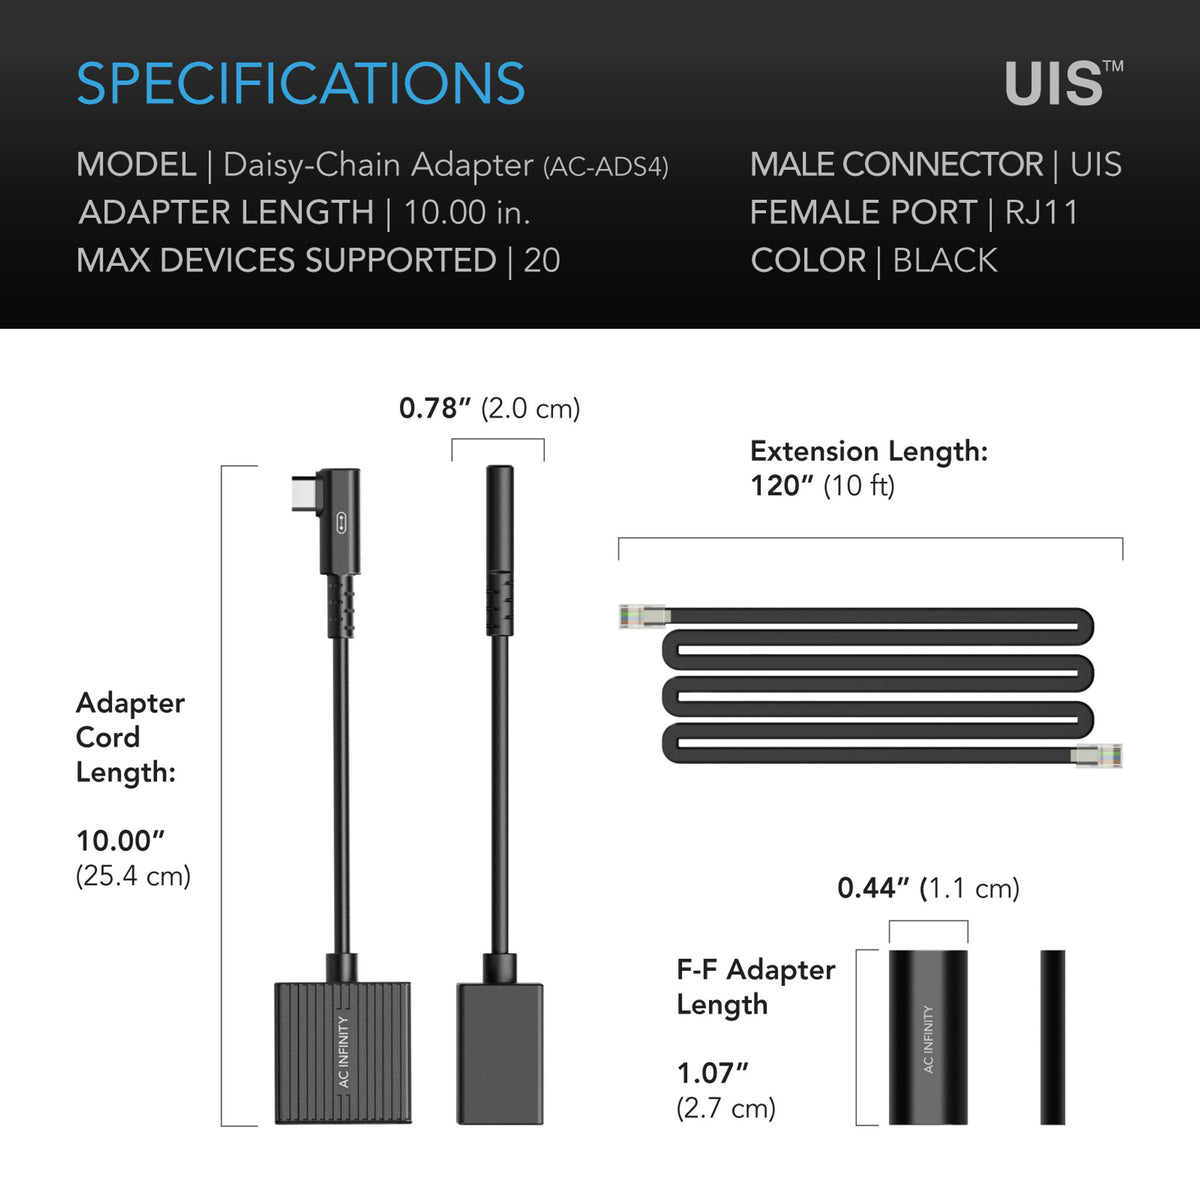 UIS Daisy Chain Adapter Specifications